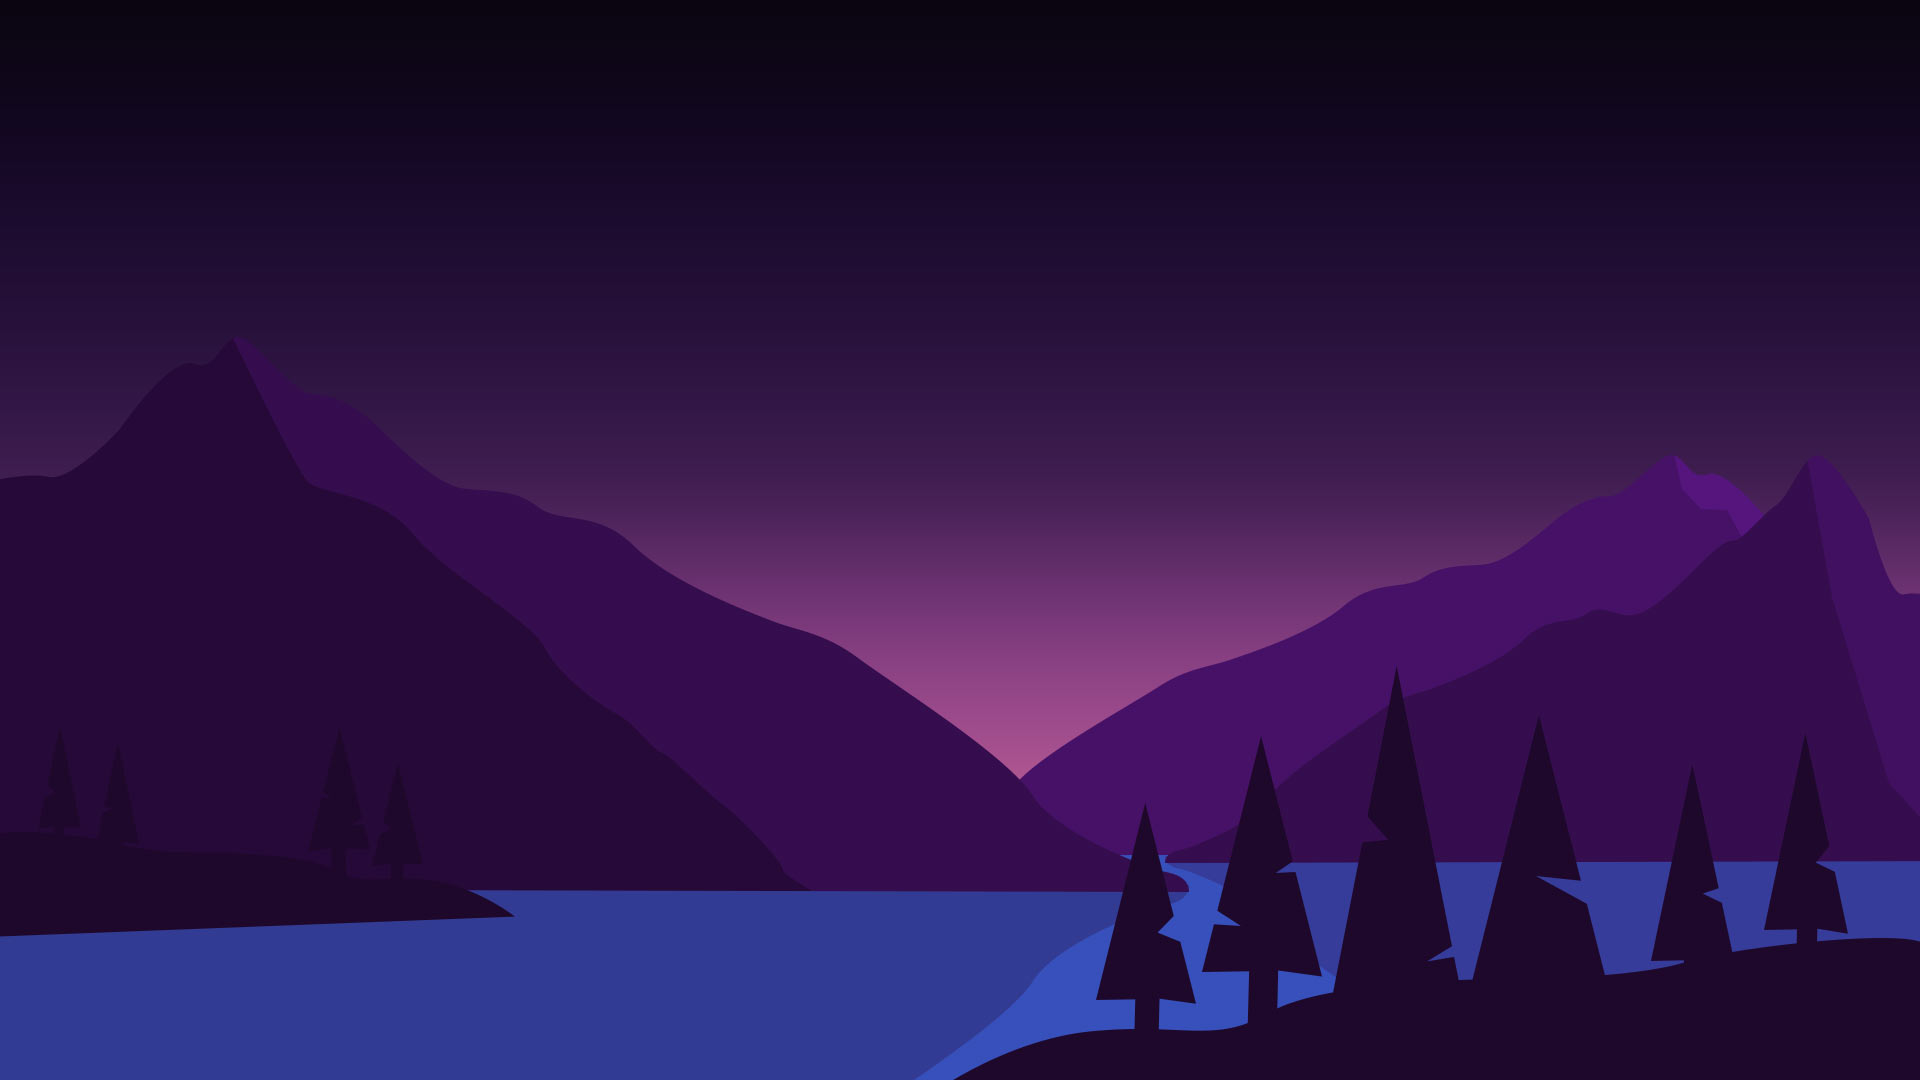 draw vector trees and vector island silhouette